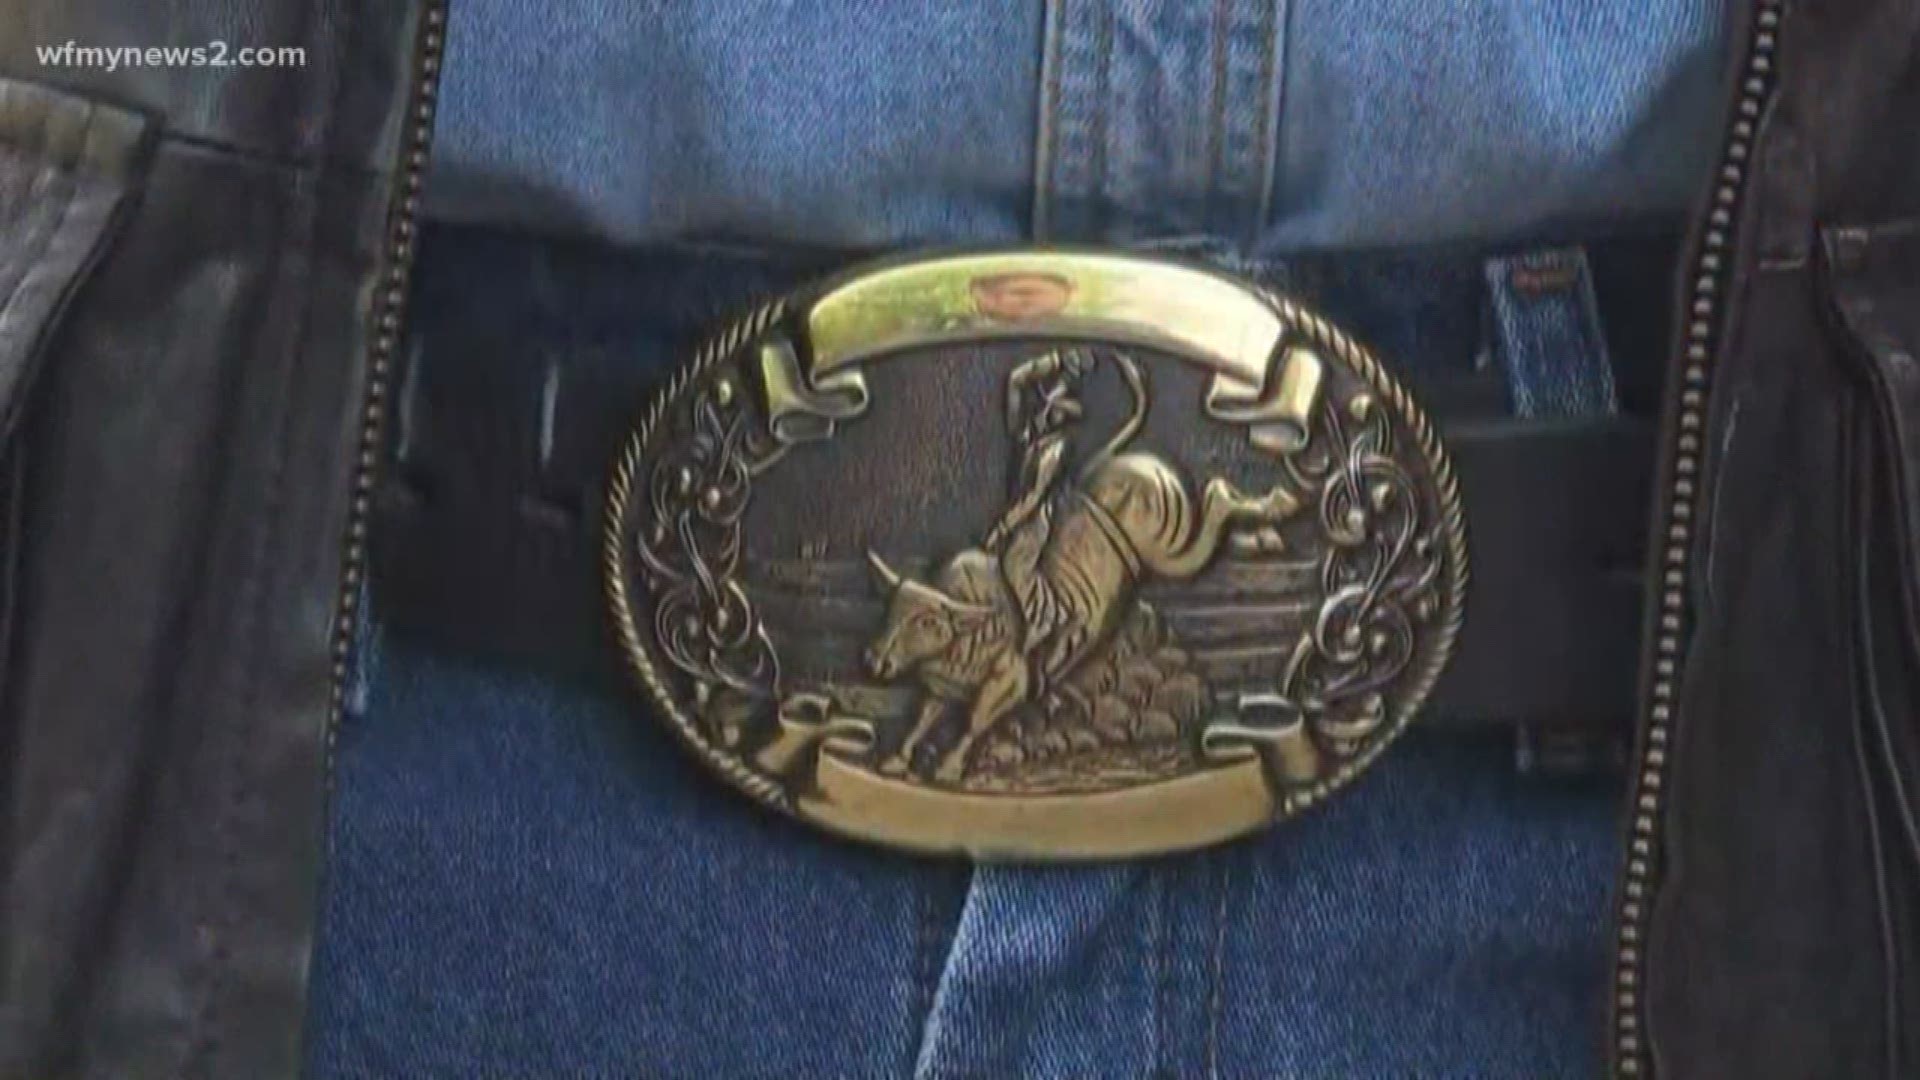 The King of racing is the proud owner of hundreds of belt buckles.